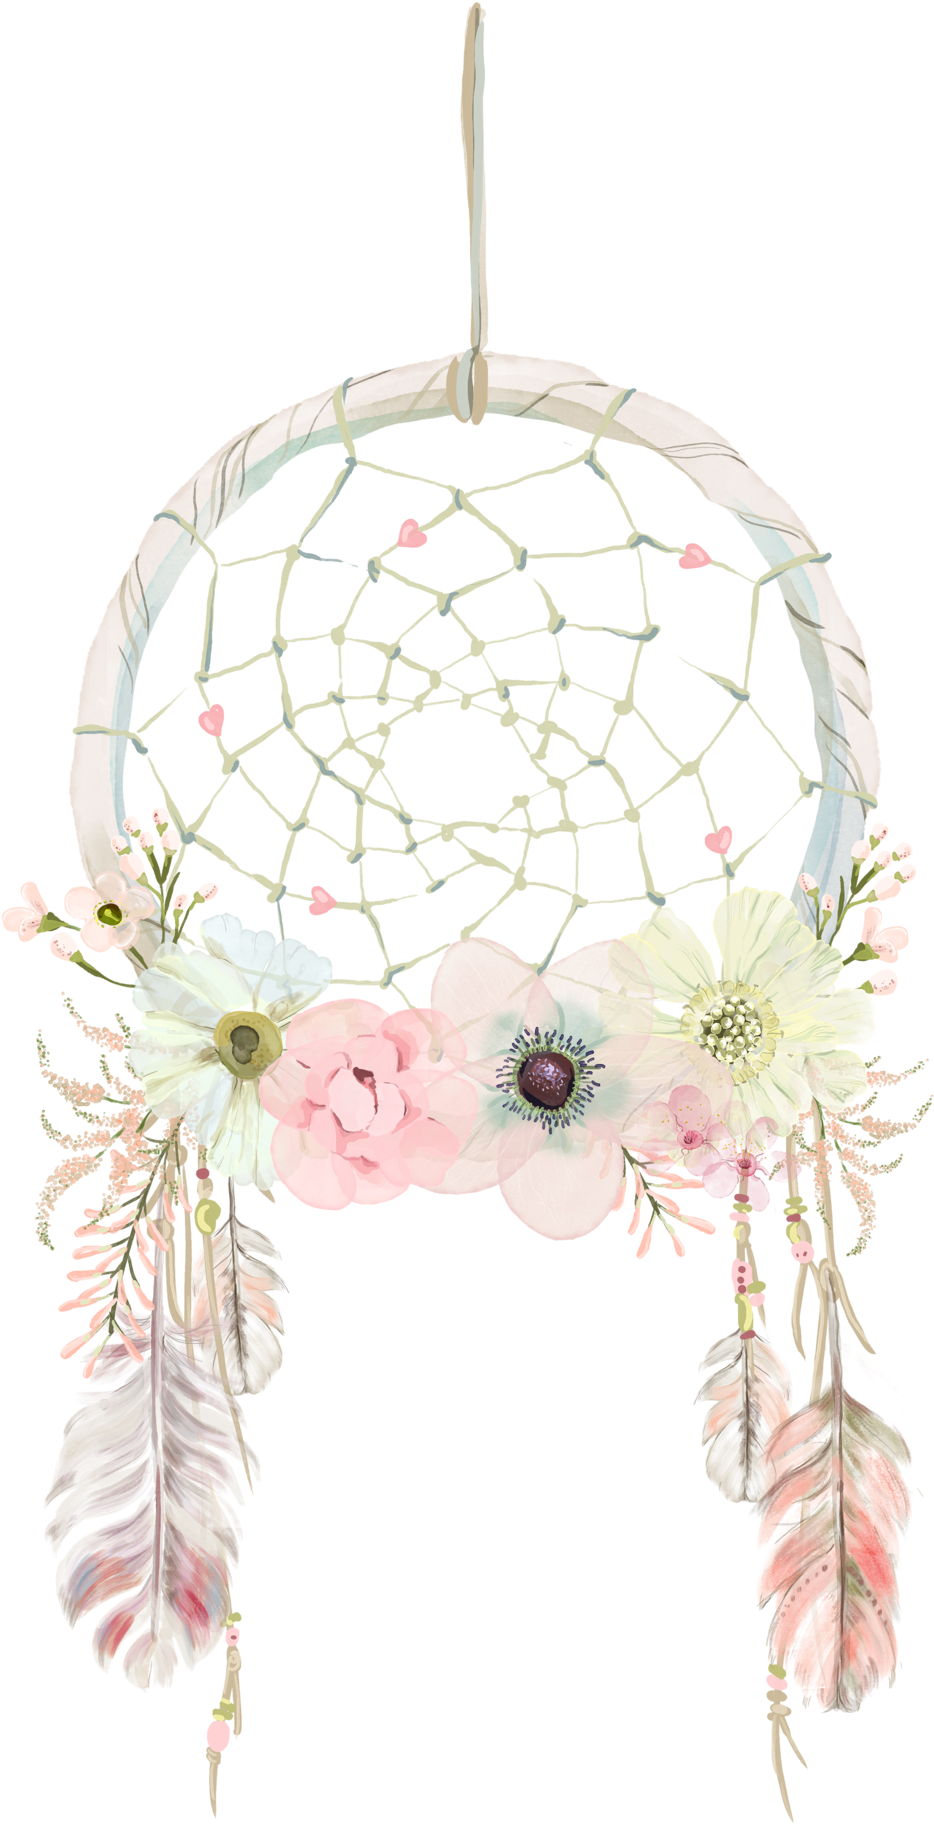 A Dream Catcher With Flowers And Feathers